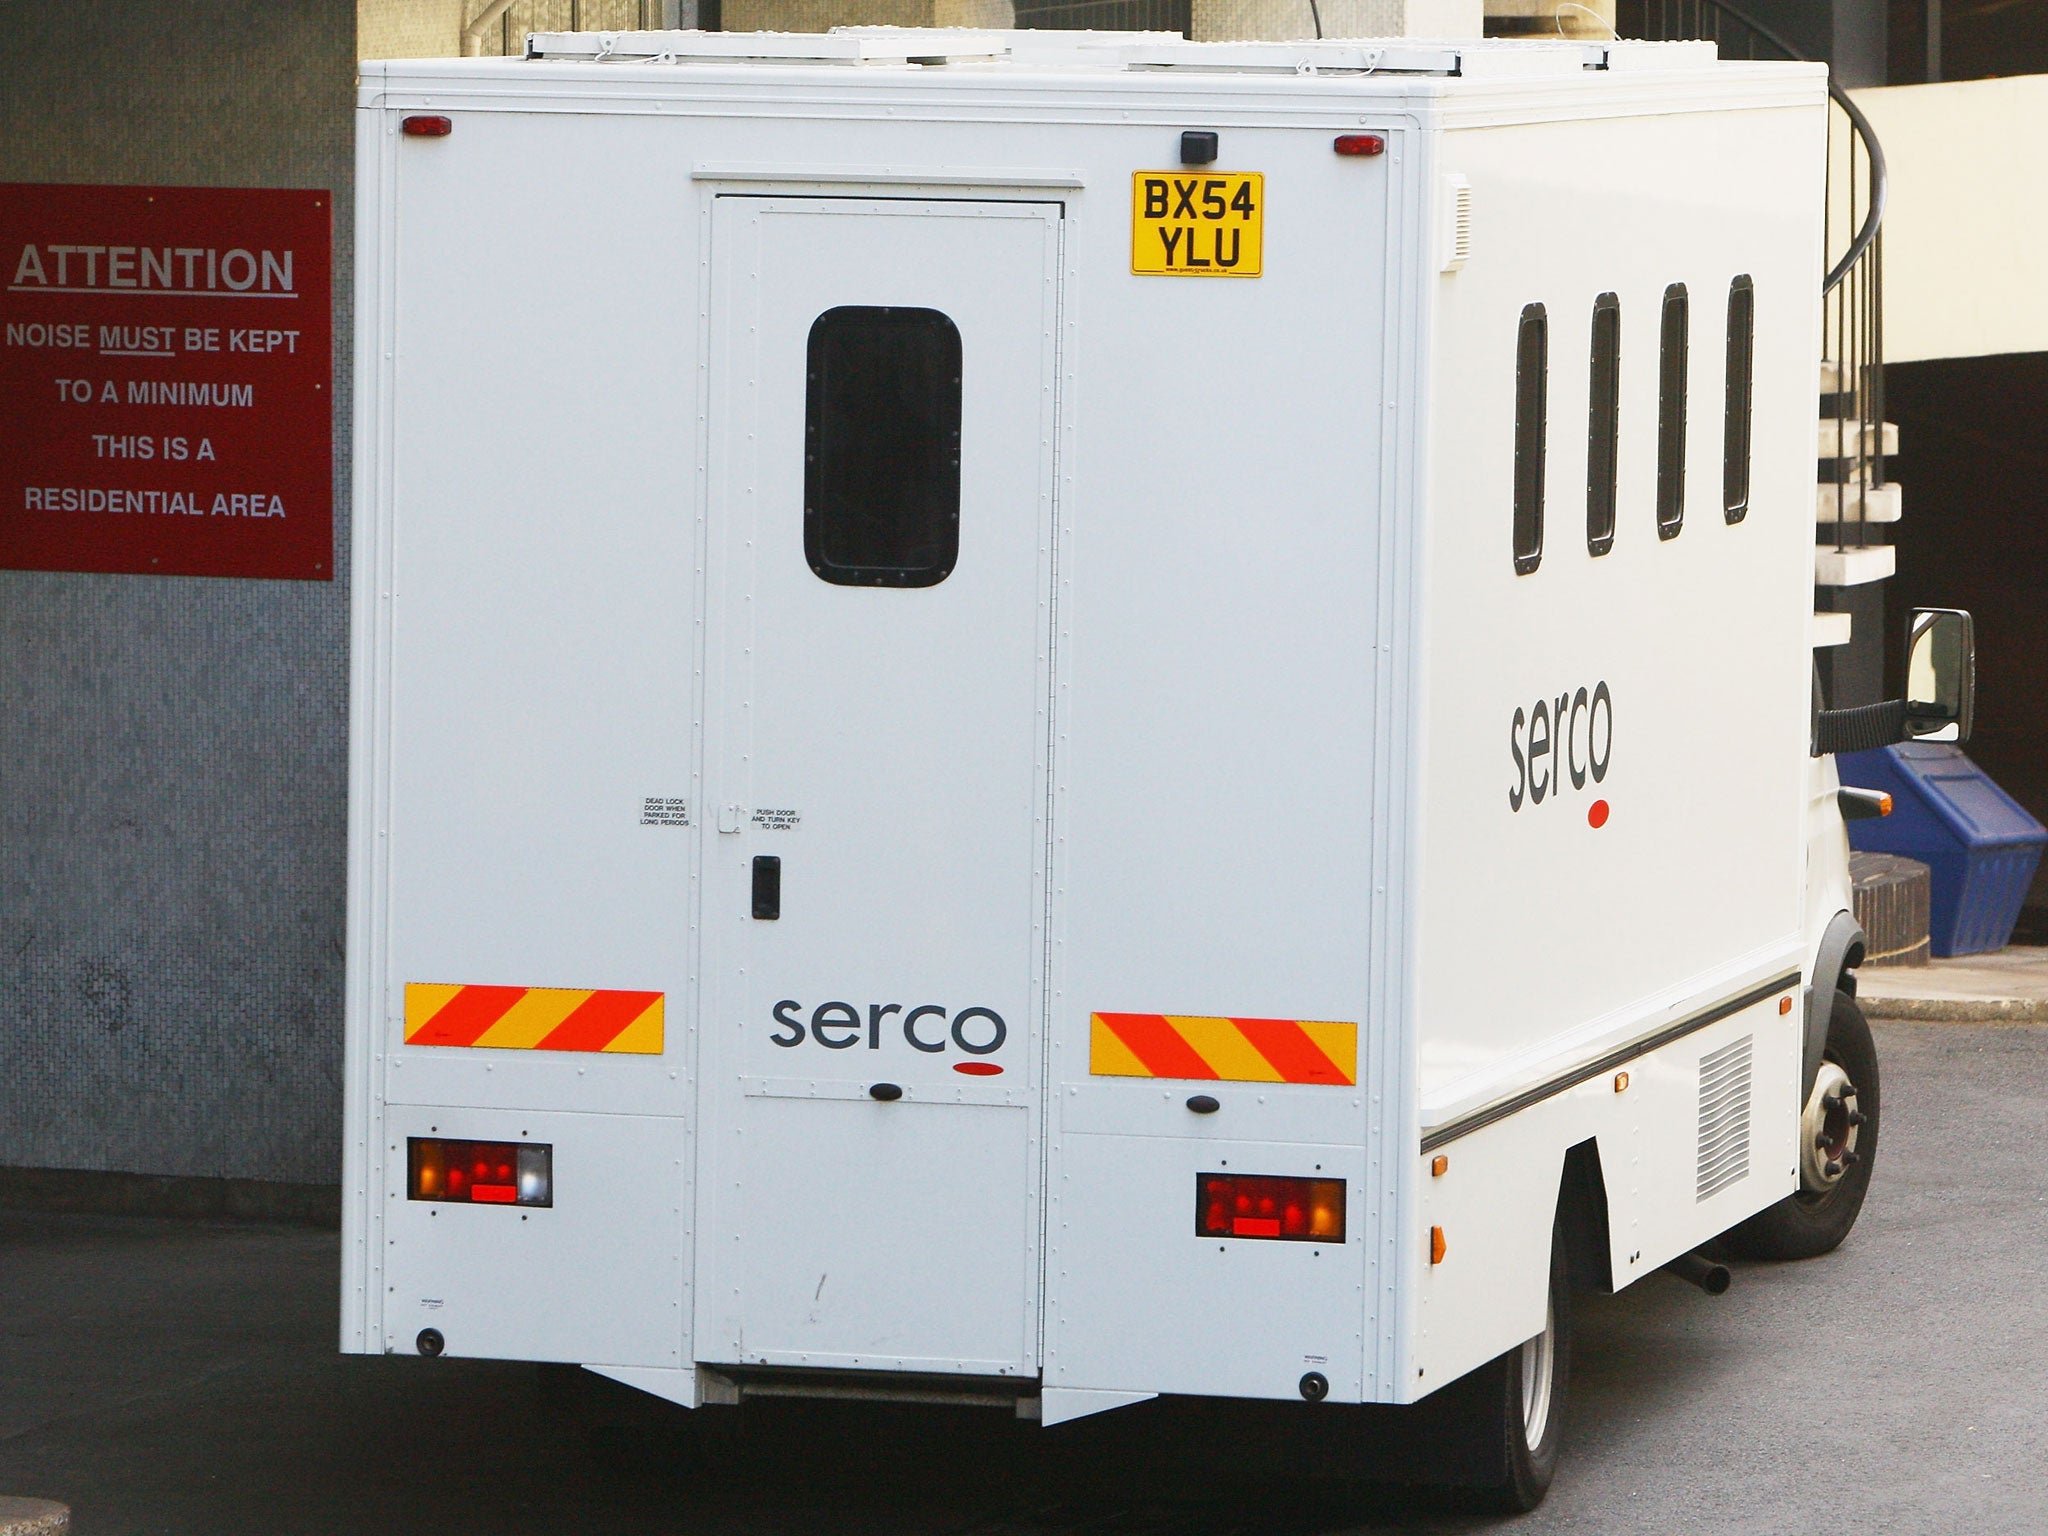 A Serco van used to transport defenders. Serco has also come under fire for overcharging taxpayers